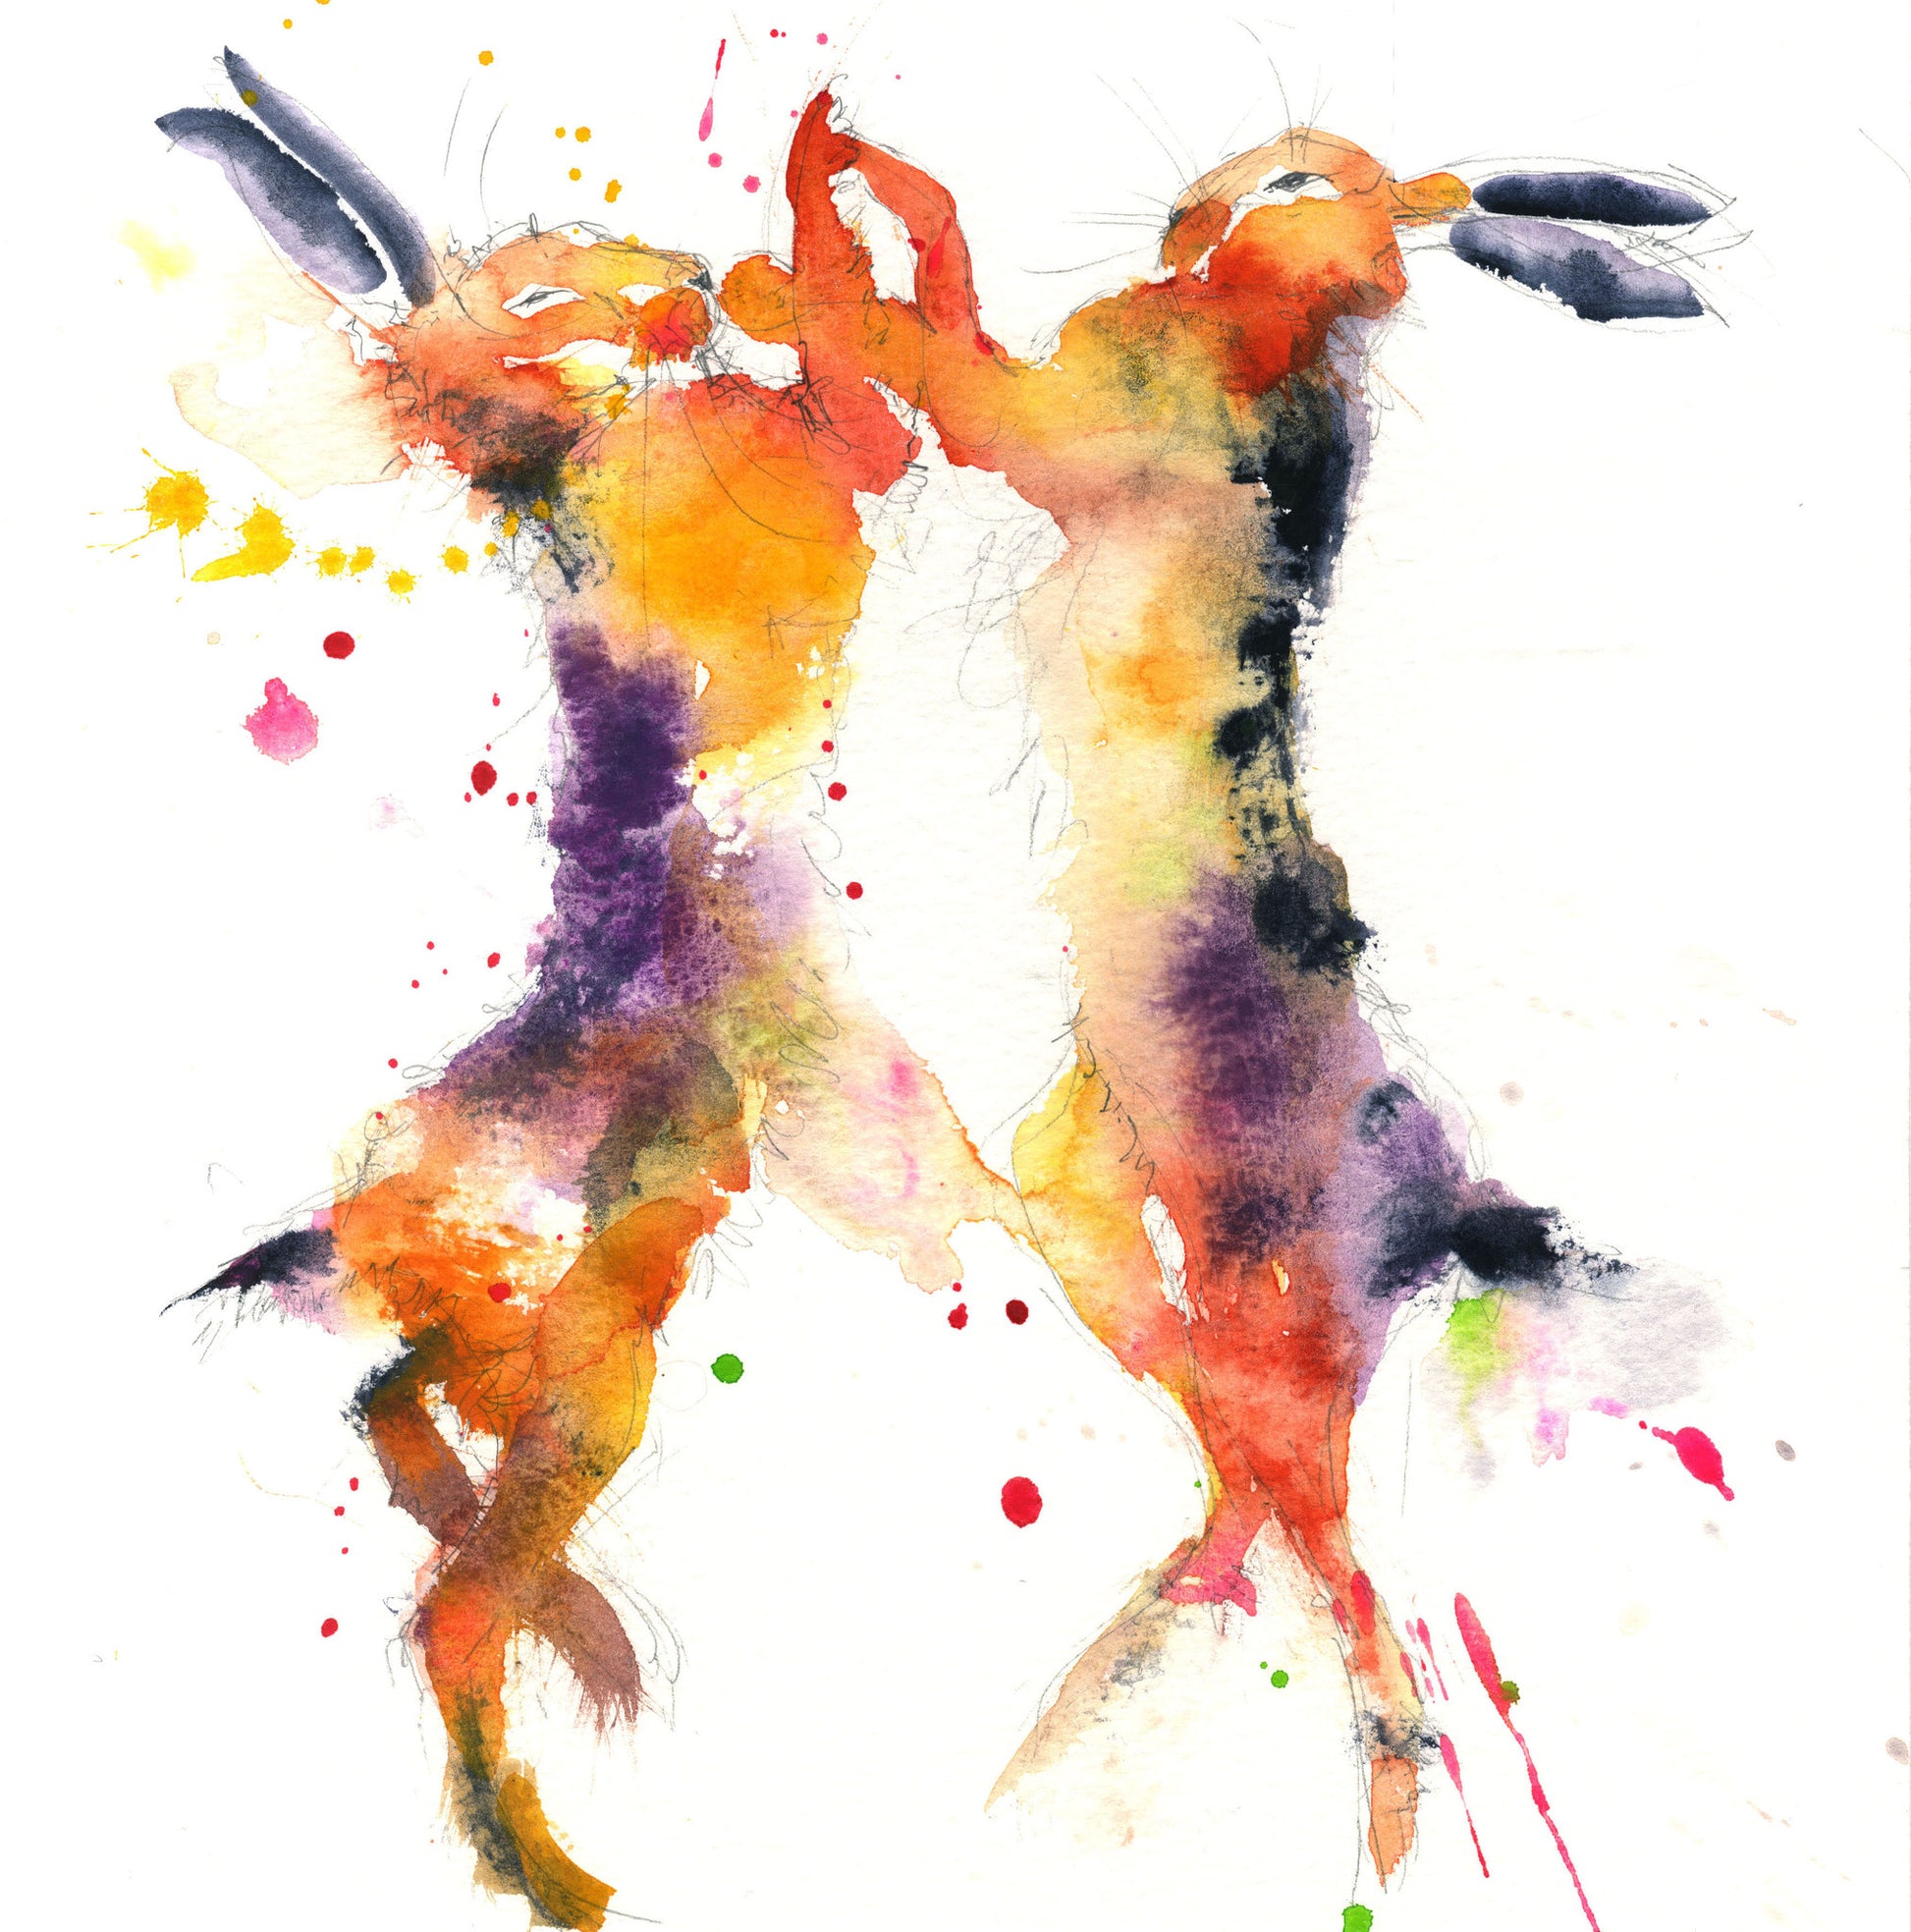 LIMITED EDITION PRINT of my original BOXING HARES - Jen Buckley Art limited edition animal art prints